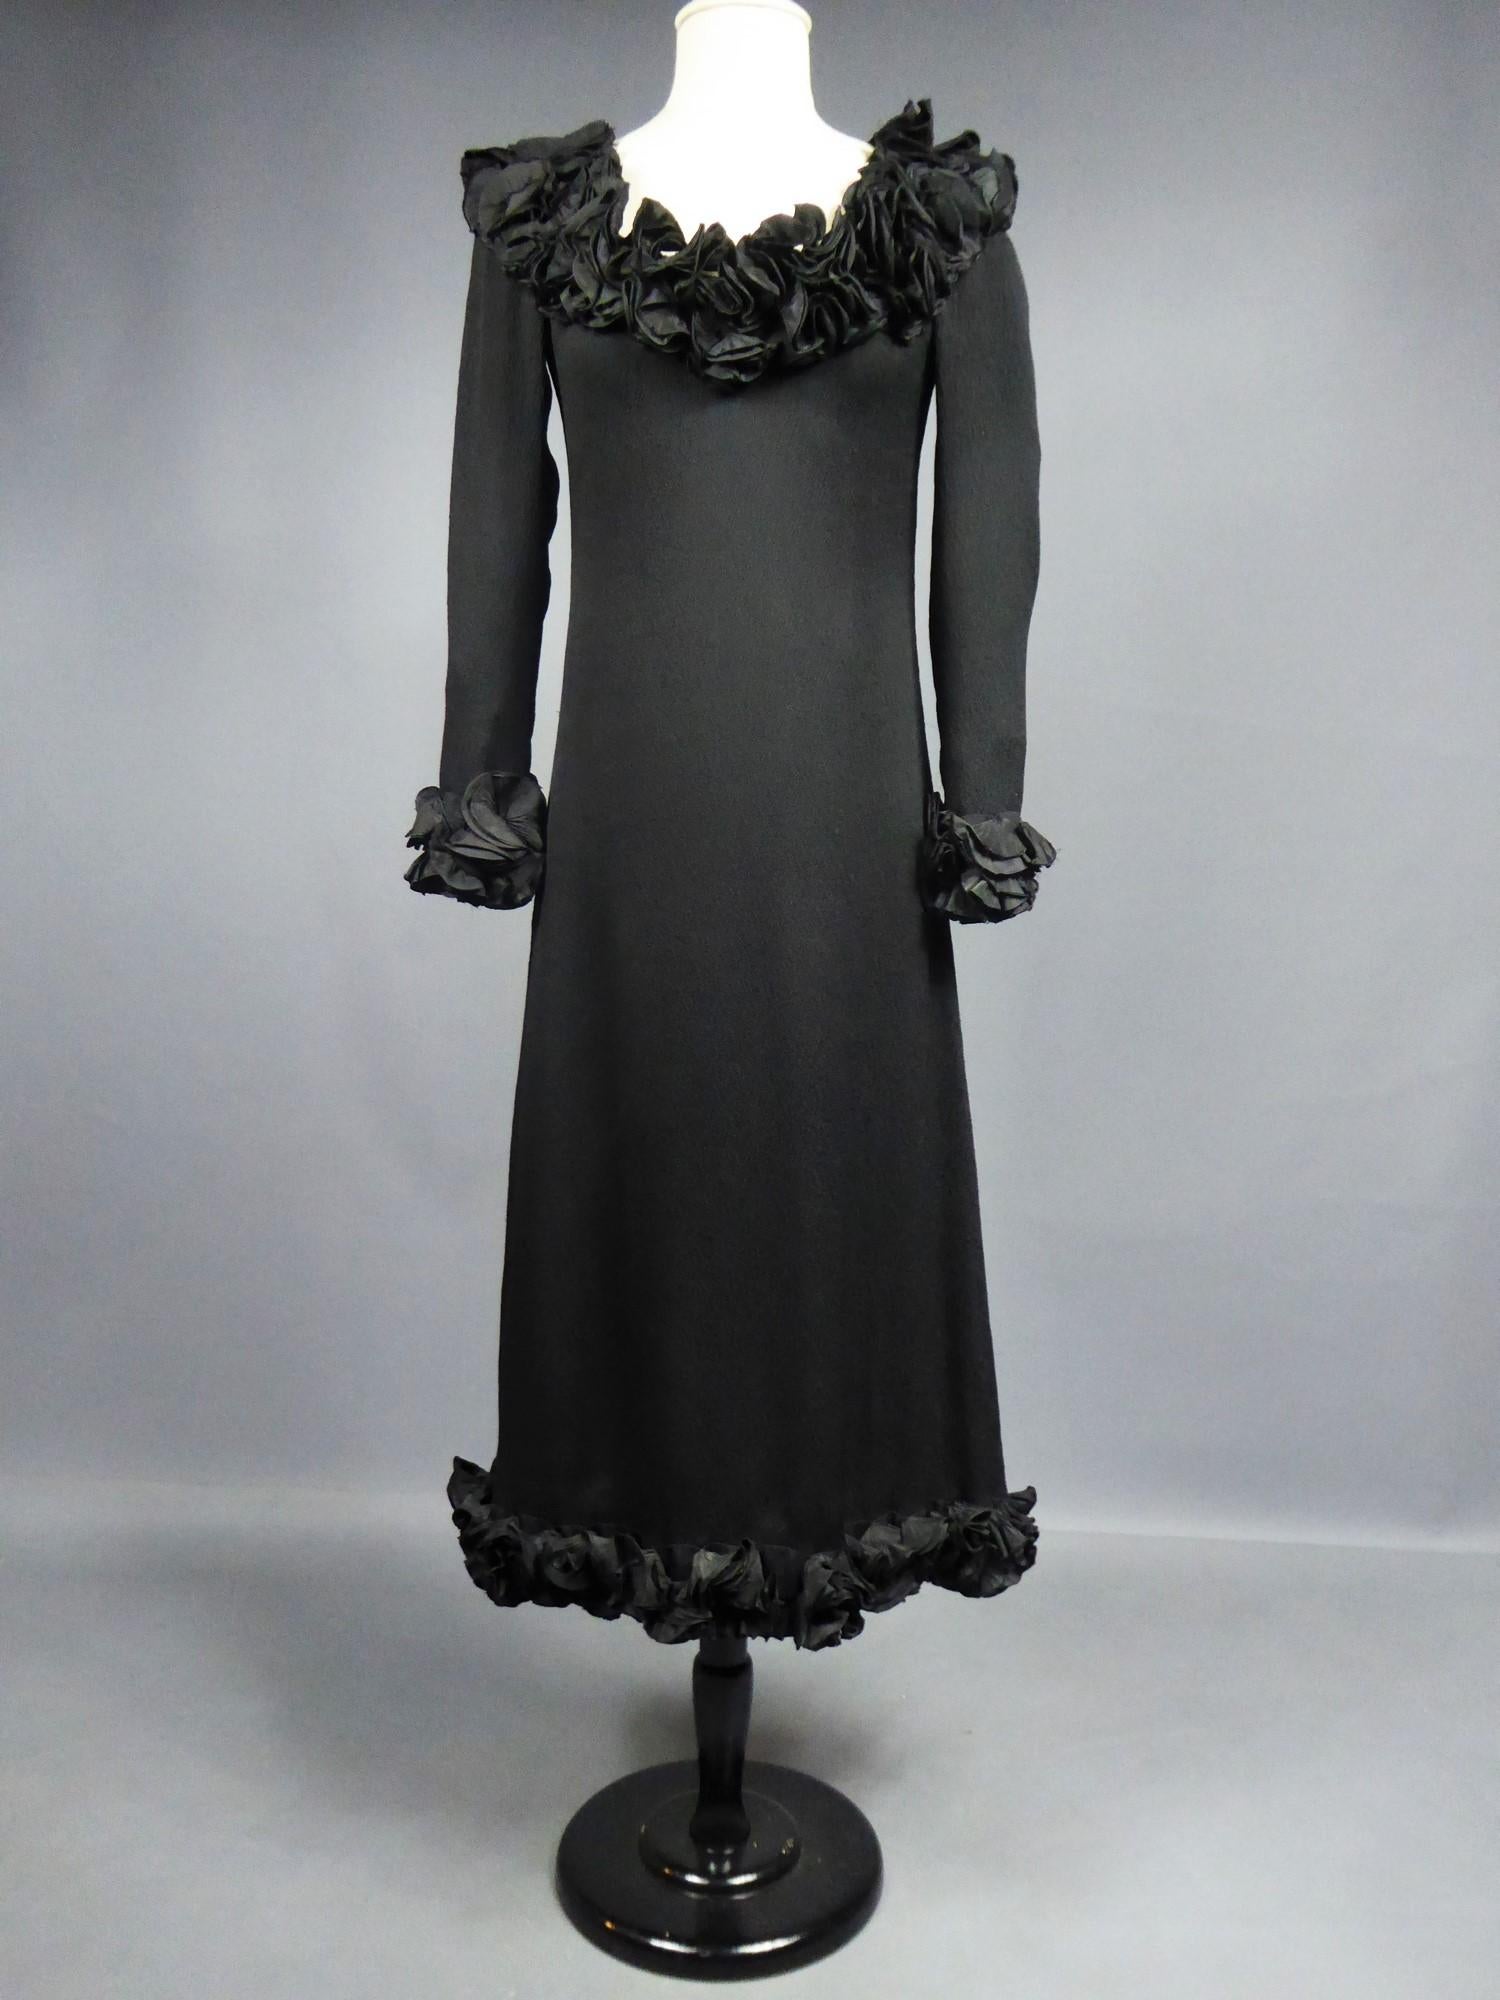 Women's Little Black Dress by Yves Saint Laurent Couture Numbered 34406 Circa 1973